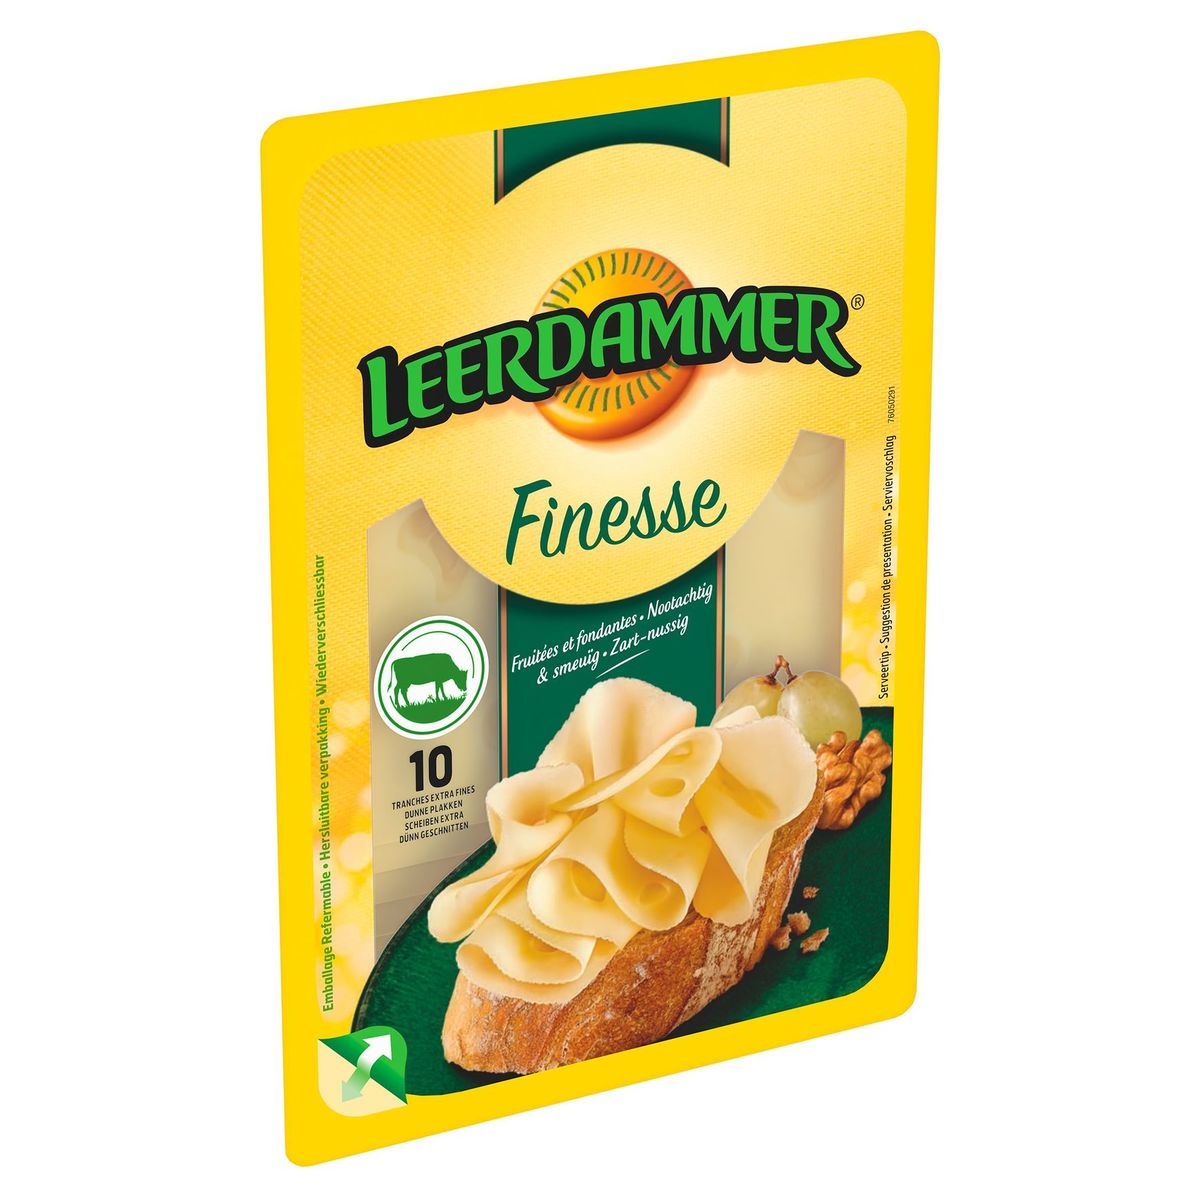 Leerdammer Finesse 10 Tranches Extra Fines 100 g